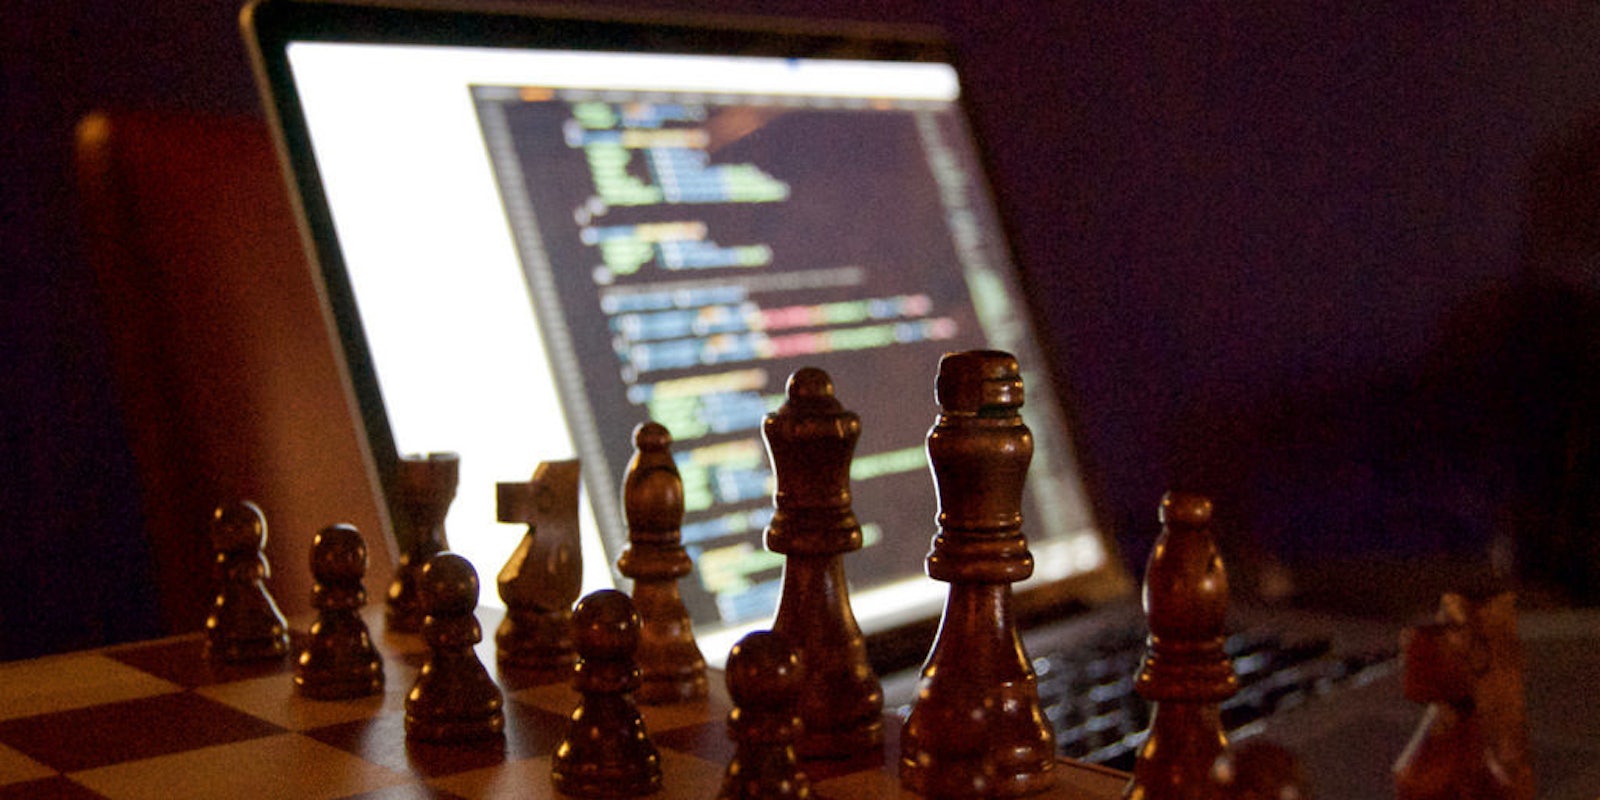 Chess board with computer code in background